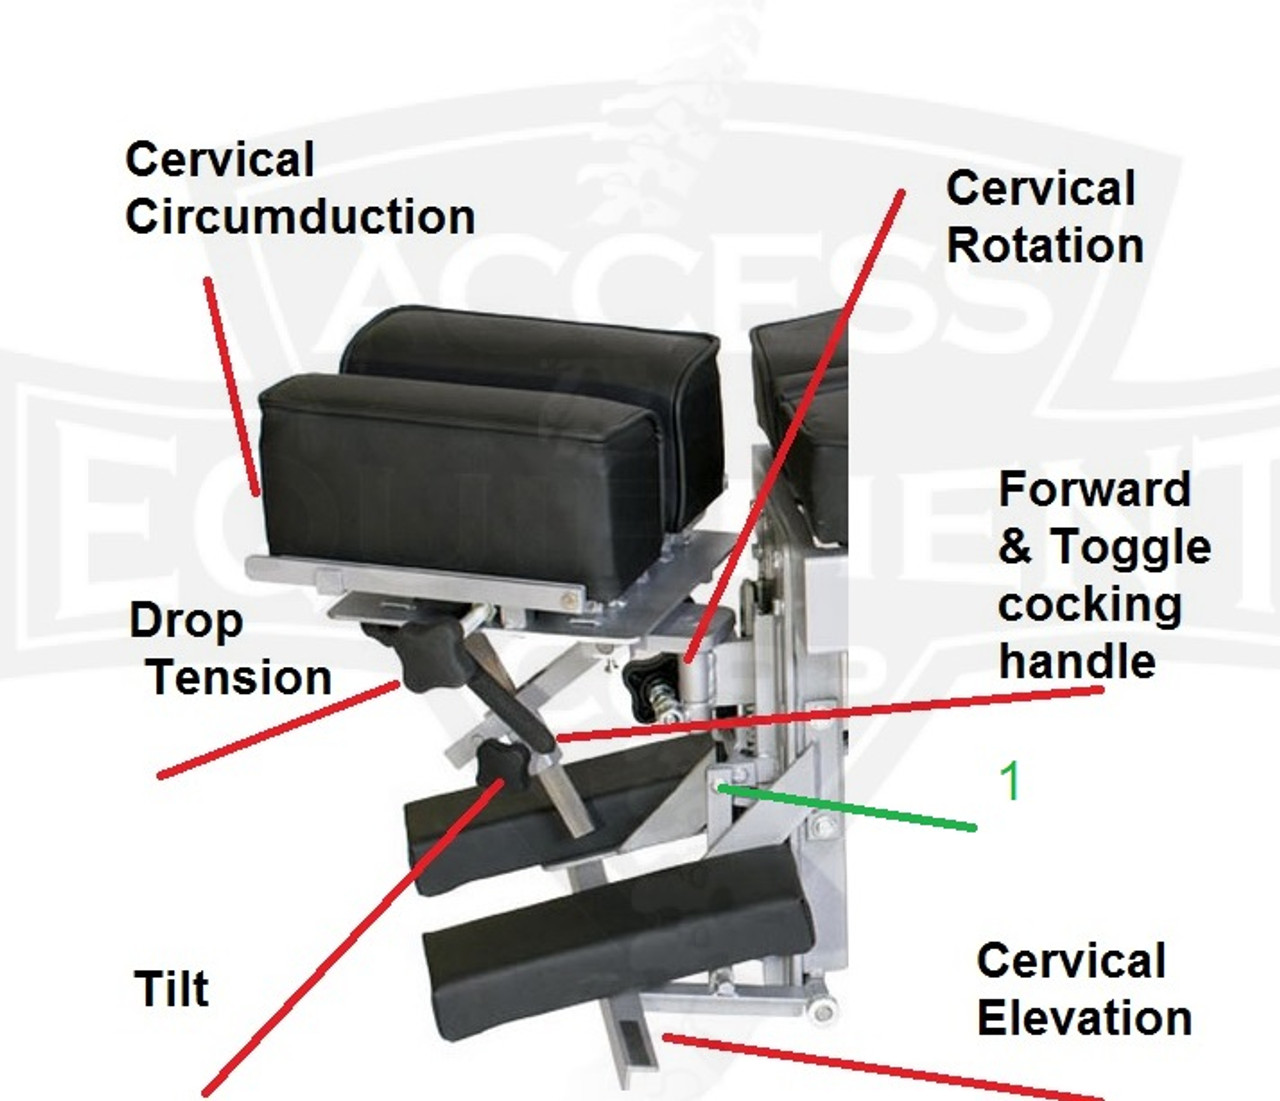 Looking for great pricing on Omni Elevation Manual Flexion Air Drop Table, Omni Elevation Manual Flexion Chiropractic Tables, Omni Elevation Manual Flexion Air Table, Omni Chiropractic Elevation Manual Flexion Air Drop Tables, Omni CBP Elevation Manual Flexion Table?